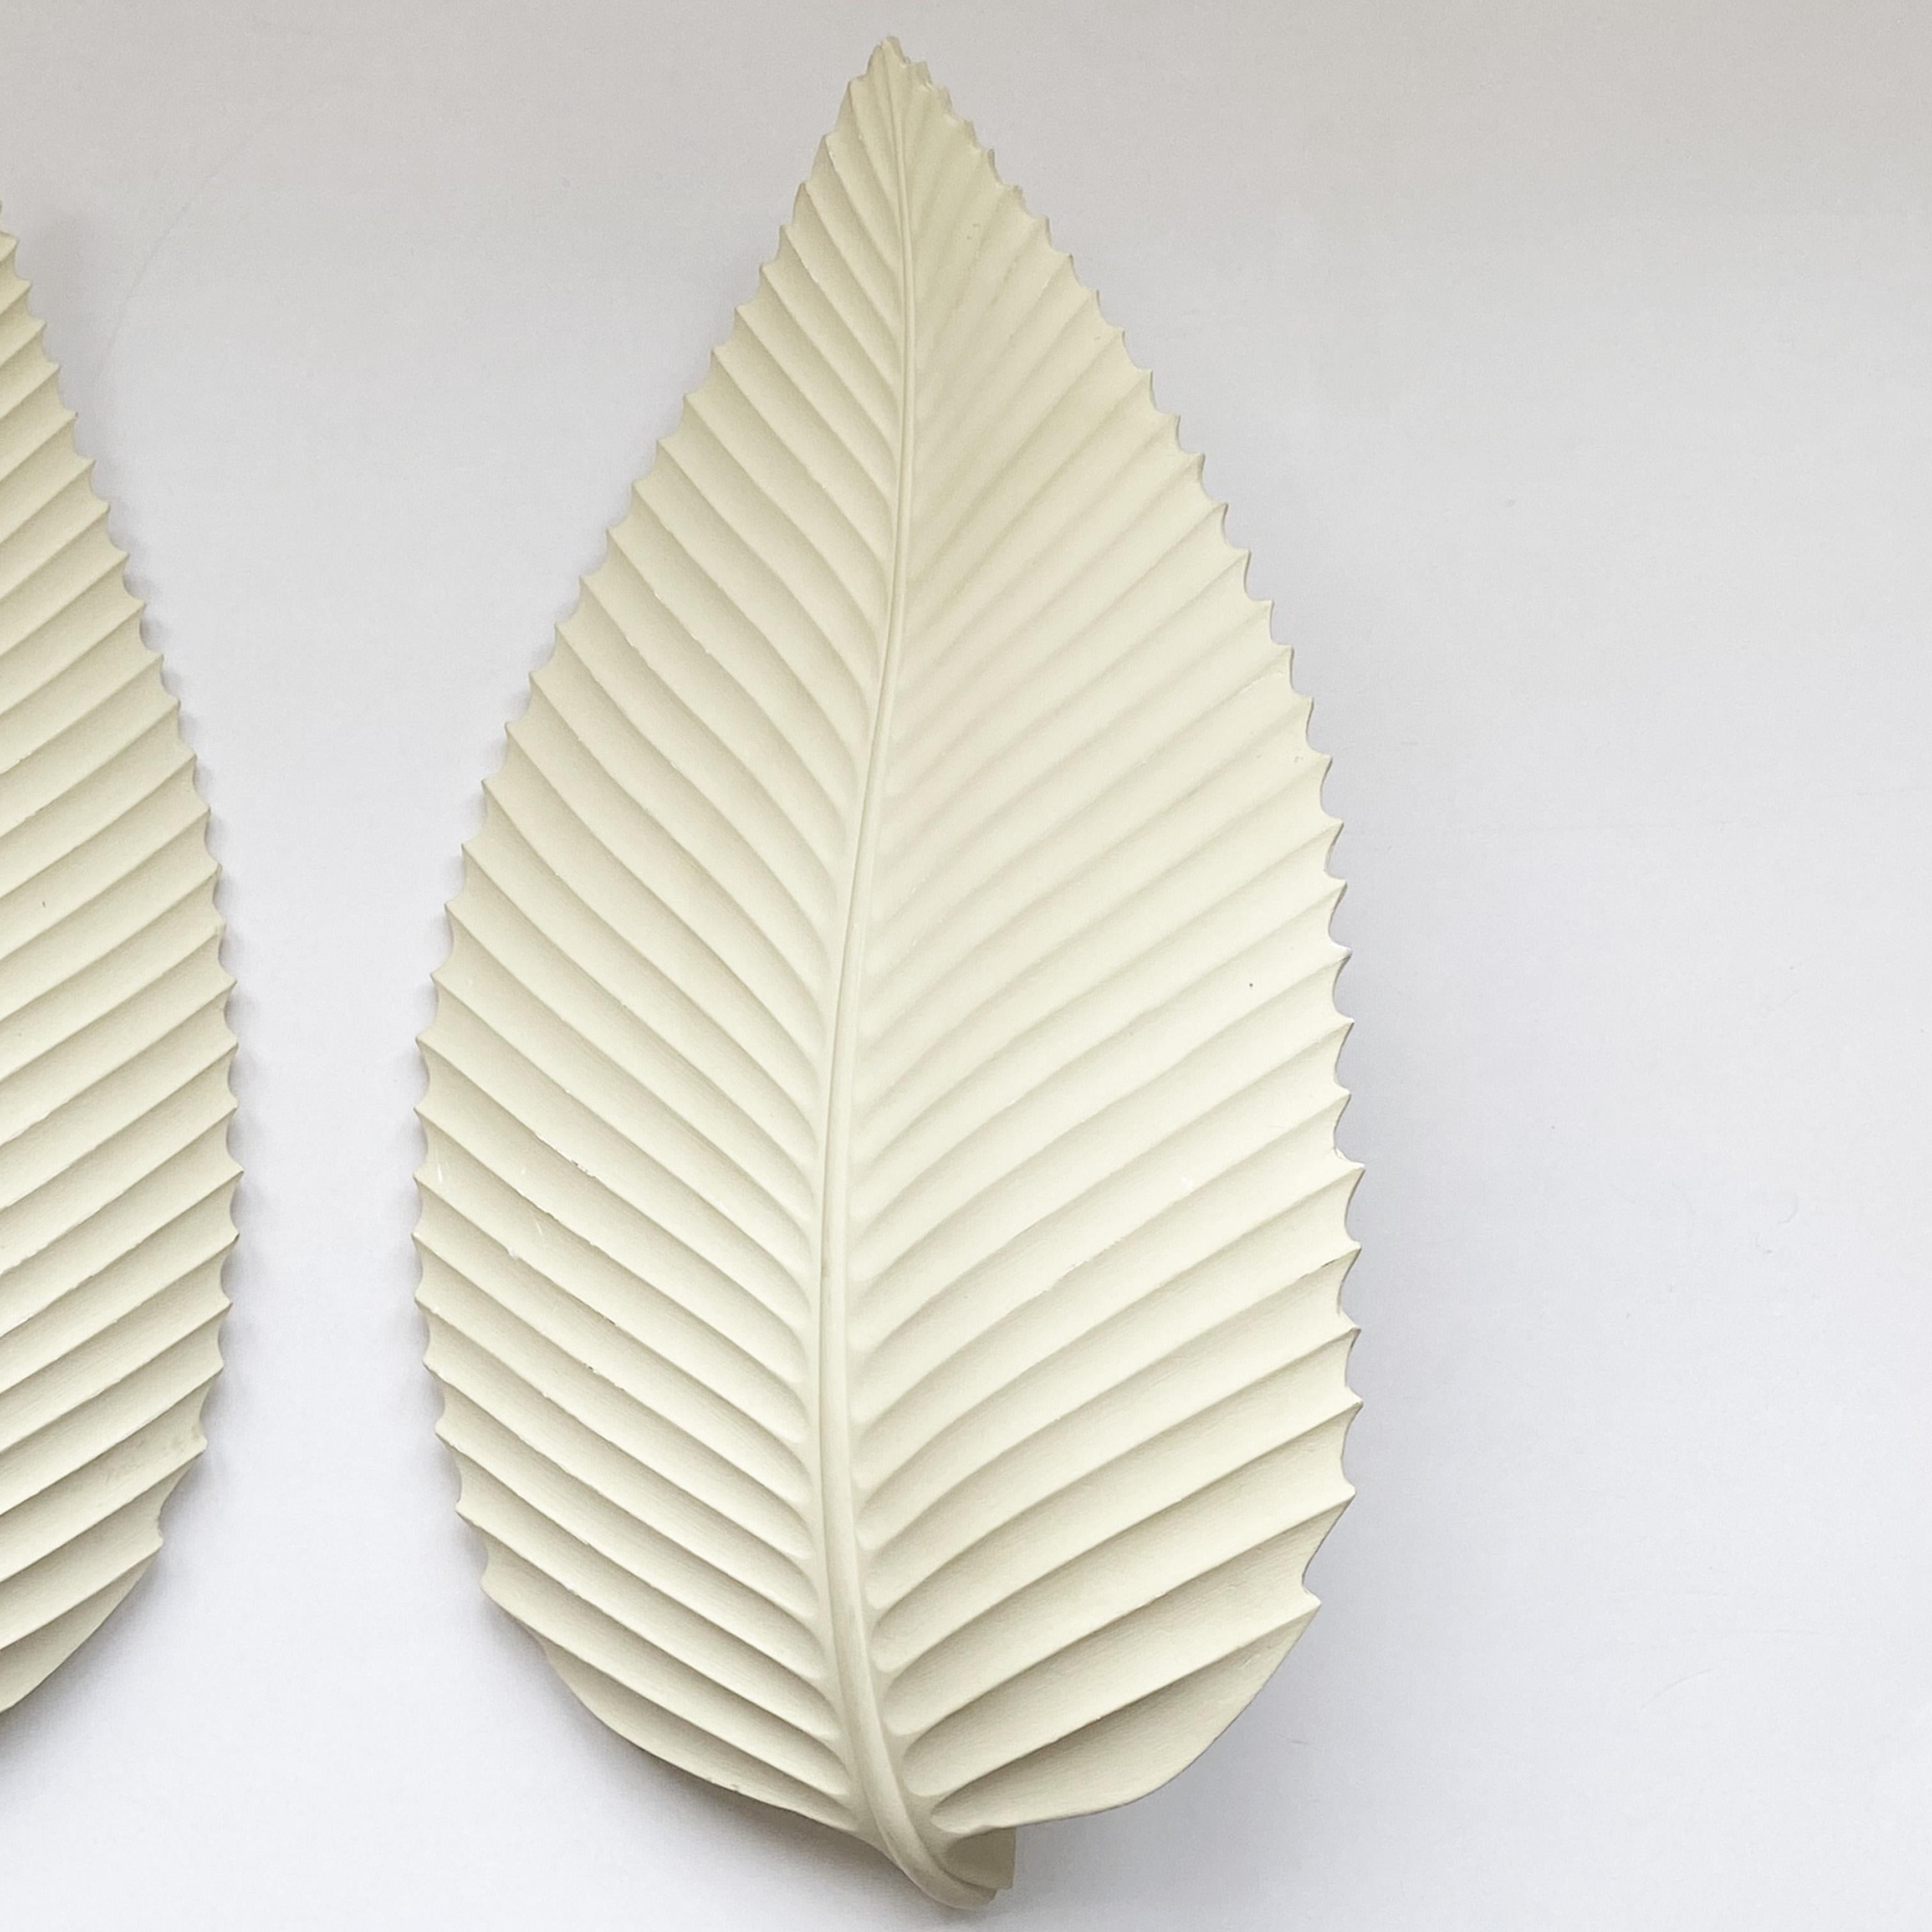 Art Deco French Plaster Beech Leaf Sconce in the style of Atelier Sedap, 1990s, set of 2.